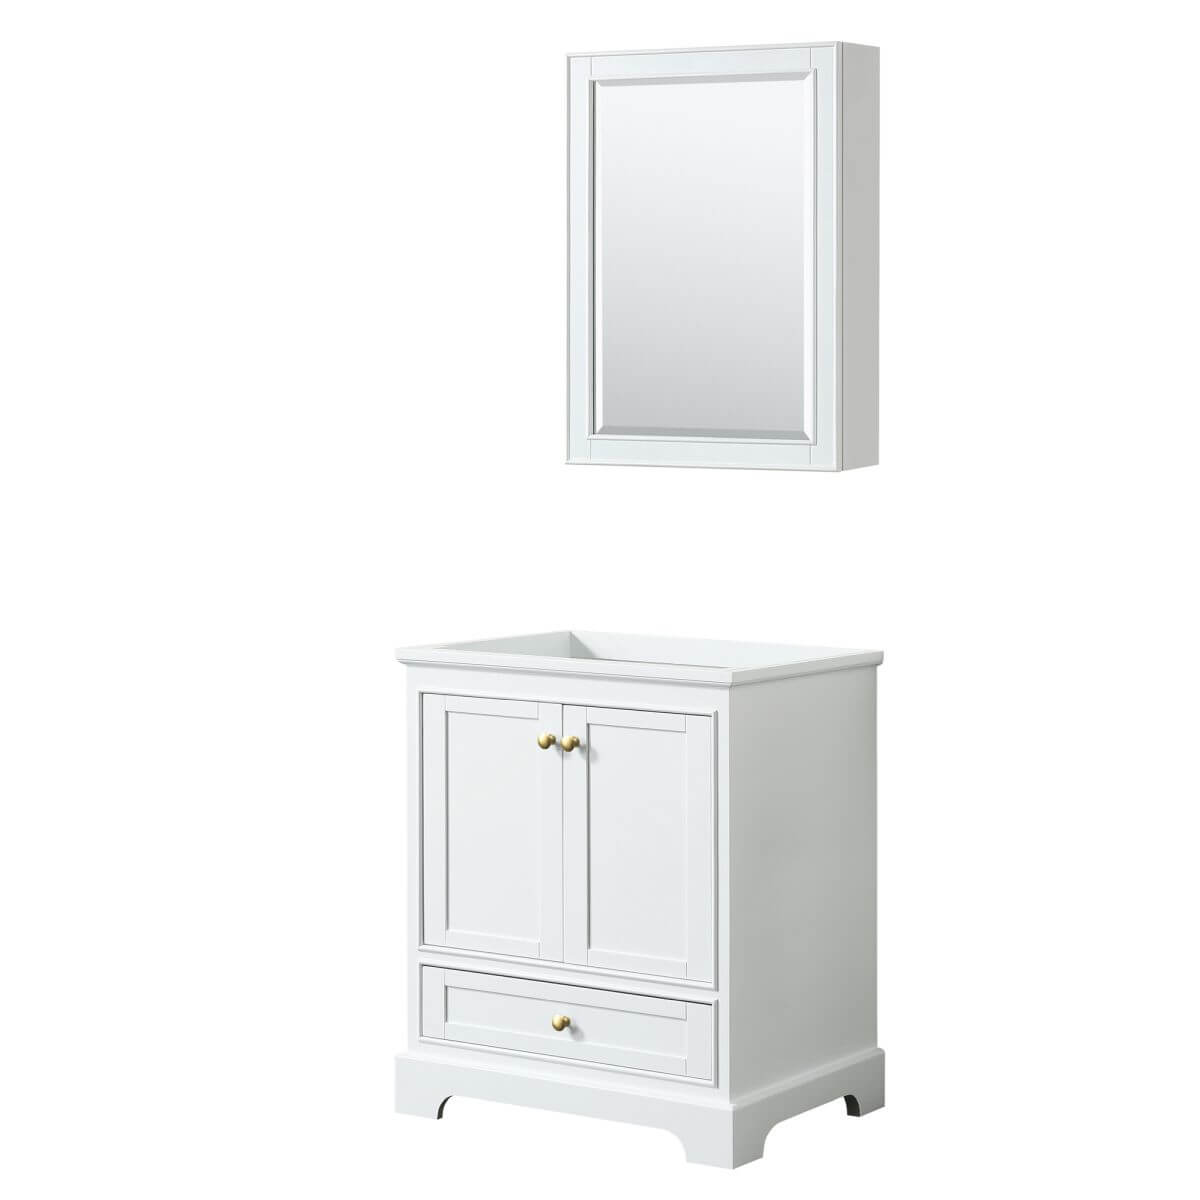 Wyndham Collection Deborah 30 inch Single Bathroom Vanity in White with Medicine Cabinet, Brushed Gold Trim, No Countertop and No Sink - WCS202030SWGCXSXXMED